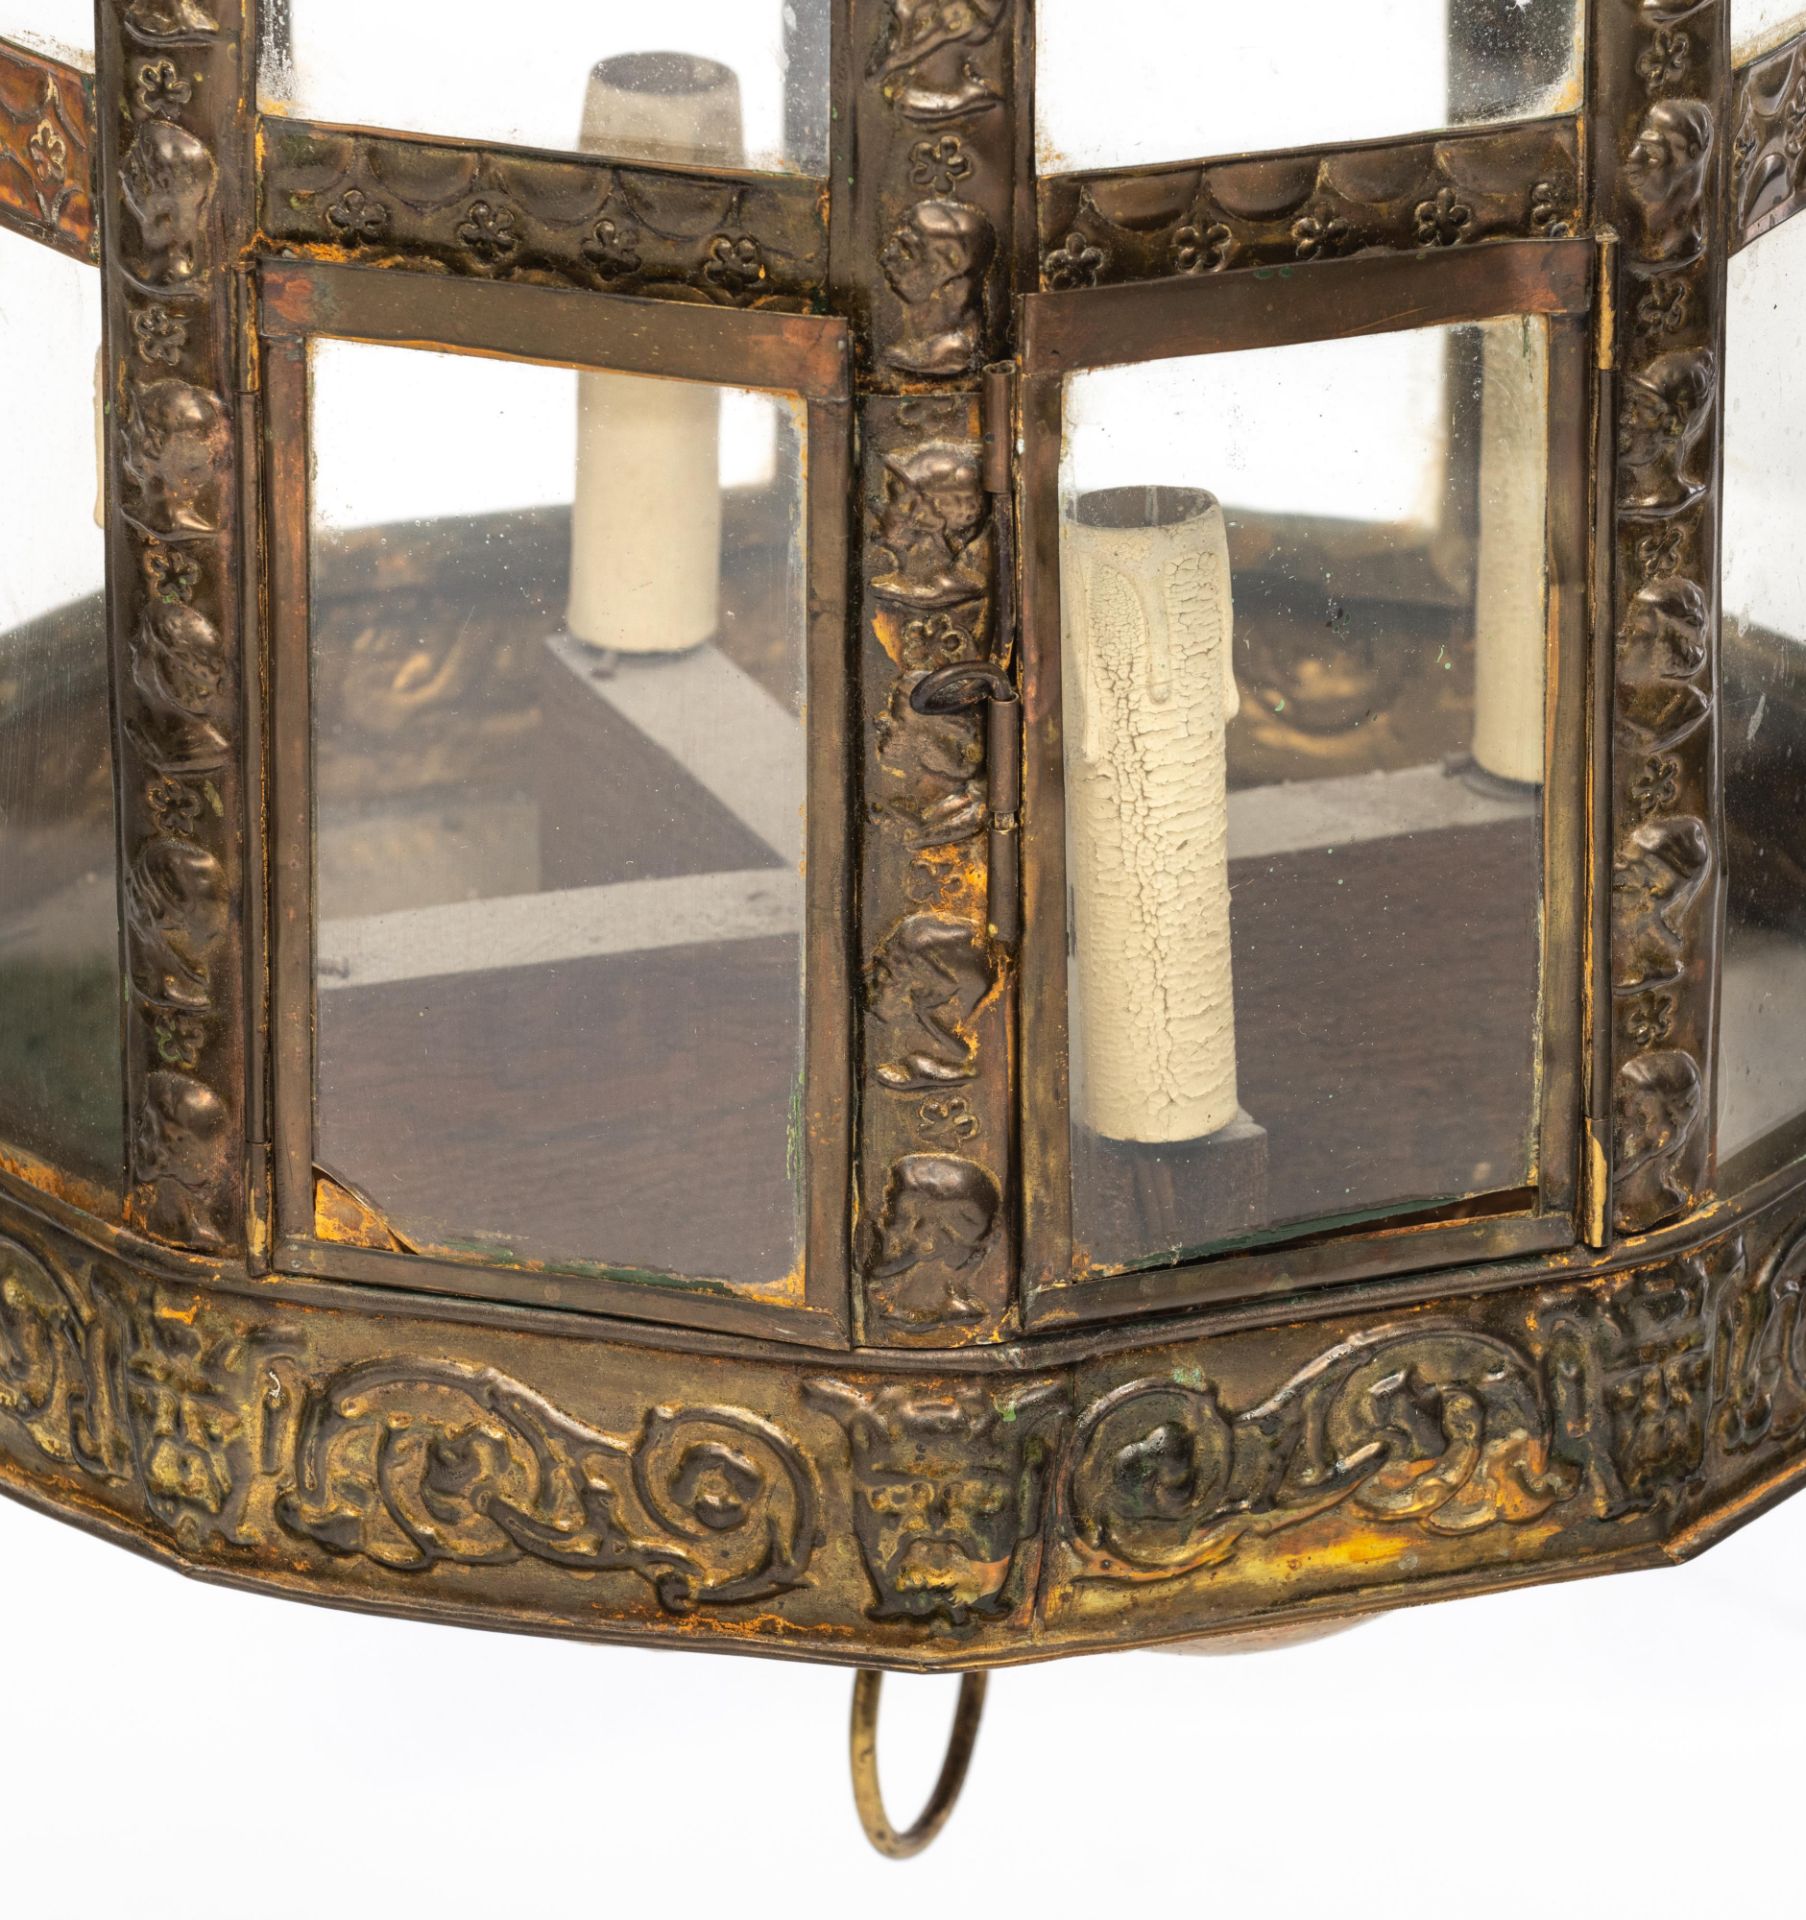 A Low-Countries brass lantern in a 17thC manner (possibly of the period or 19thC), H all-in 88 cm, , - Image 4 of 9